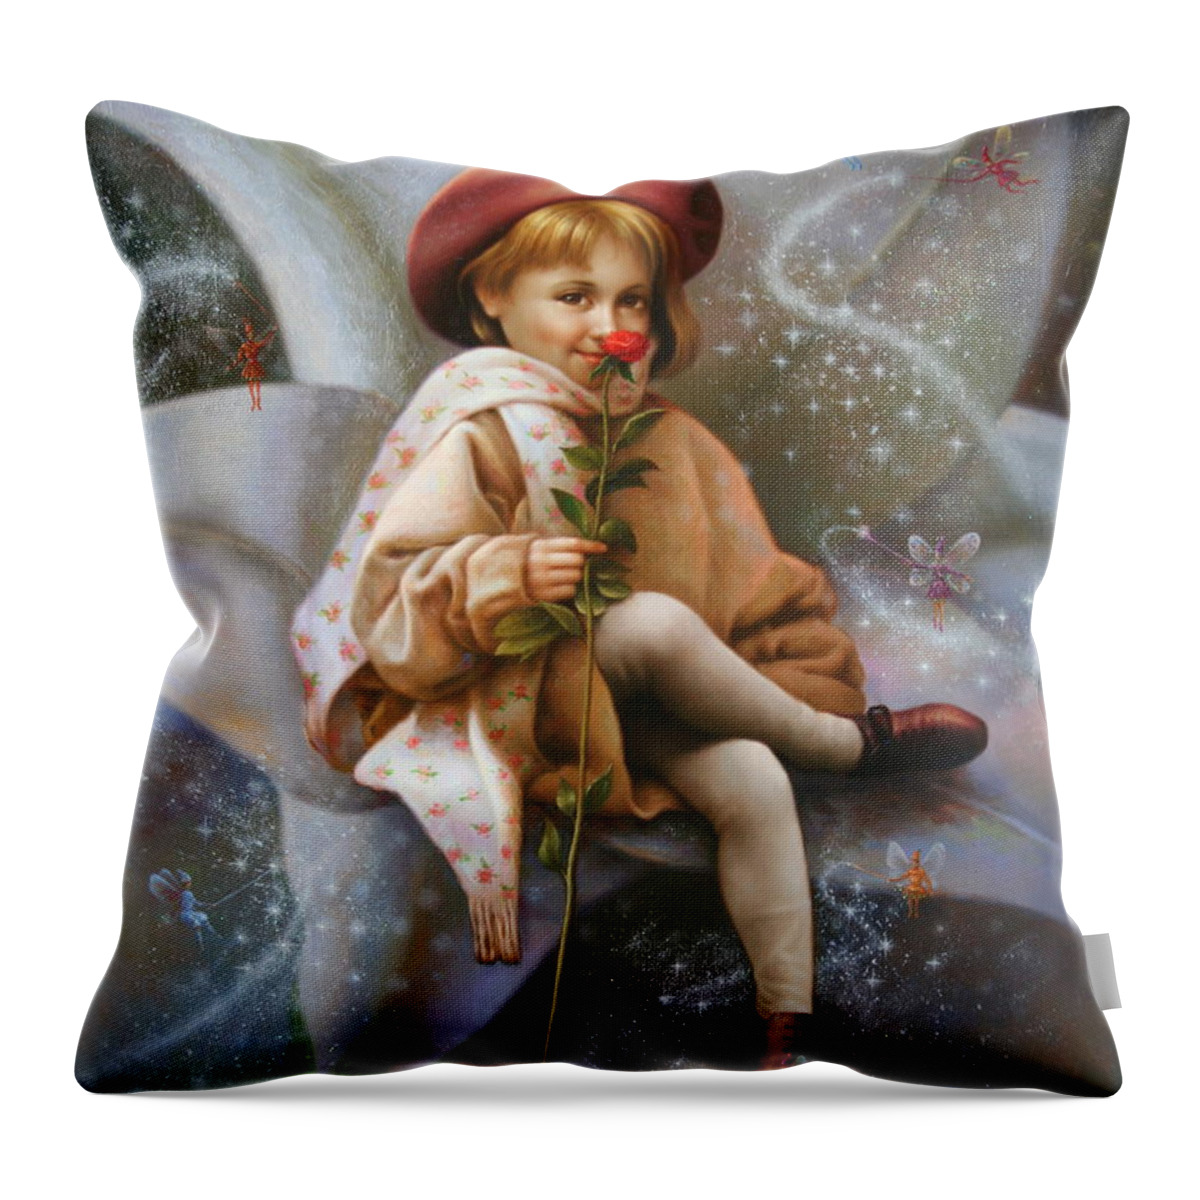 Original Throw Pillow featuring the painting A Girl And A Fairy Of 7 #1 by Yoo Choong Yeul